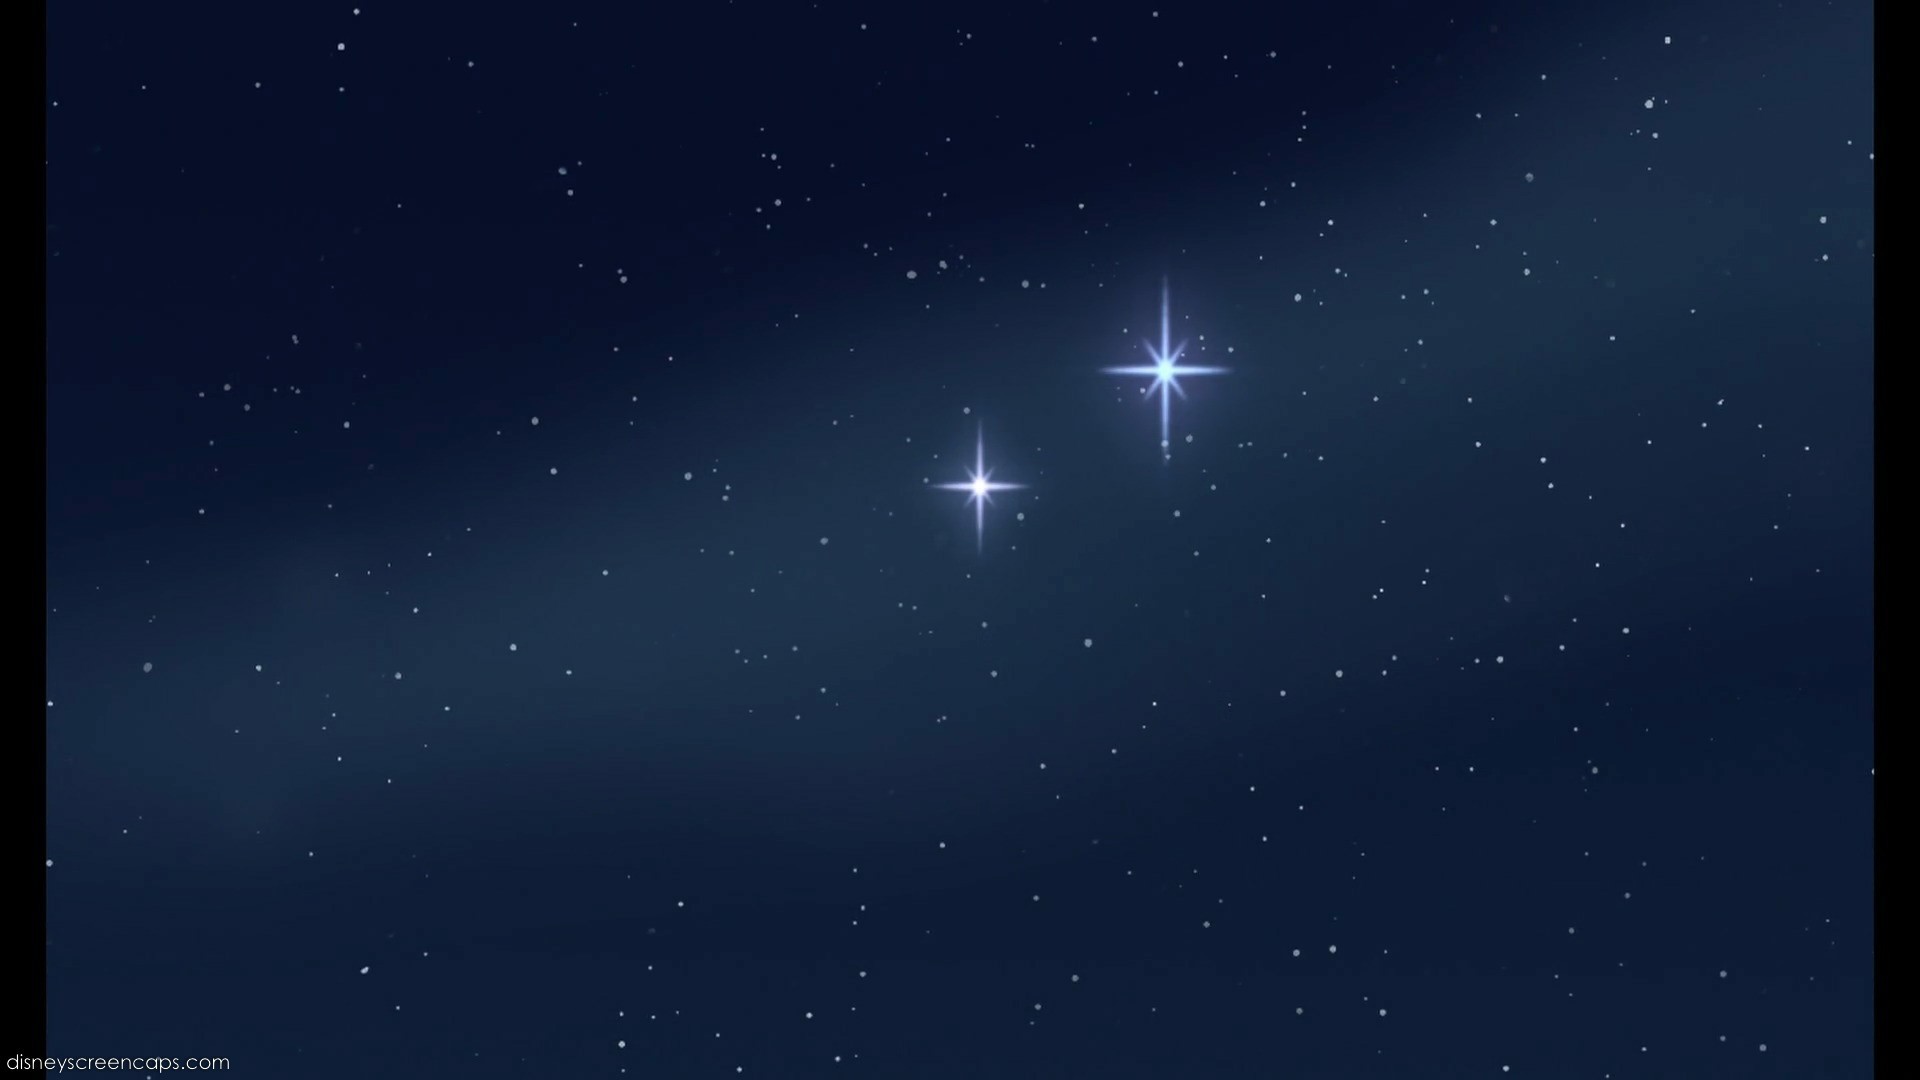 [Translate to English:] Disney Screencaps, ”Second Star to the Right” (Peter Pan, 1953)